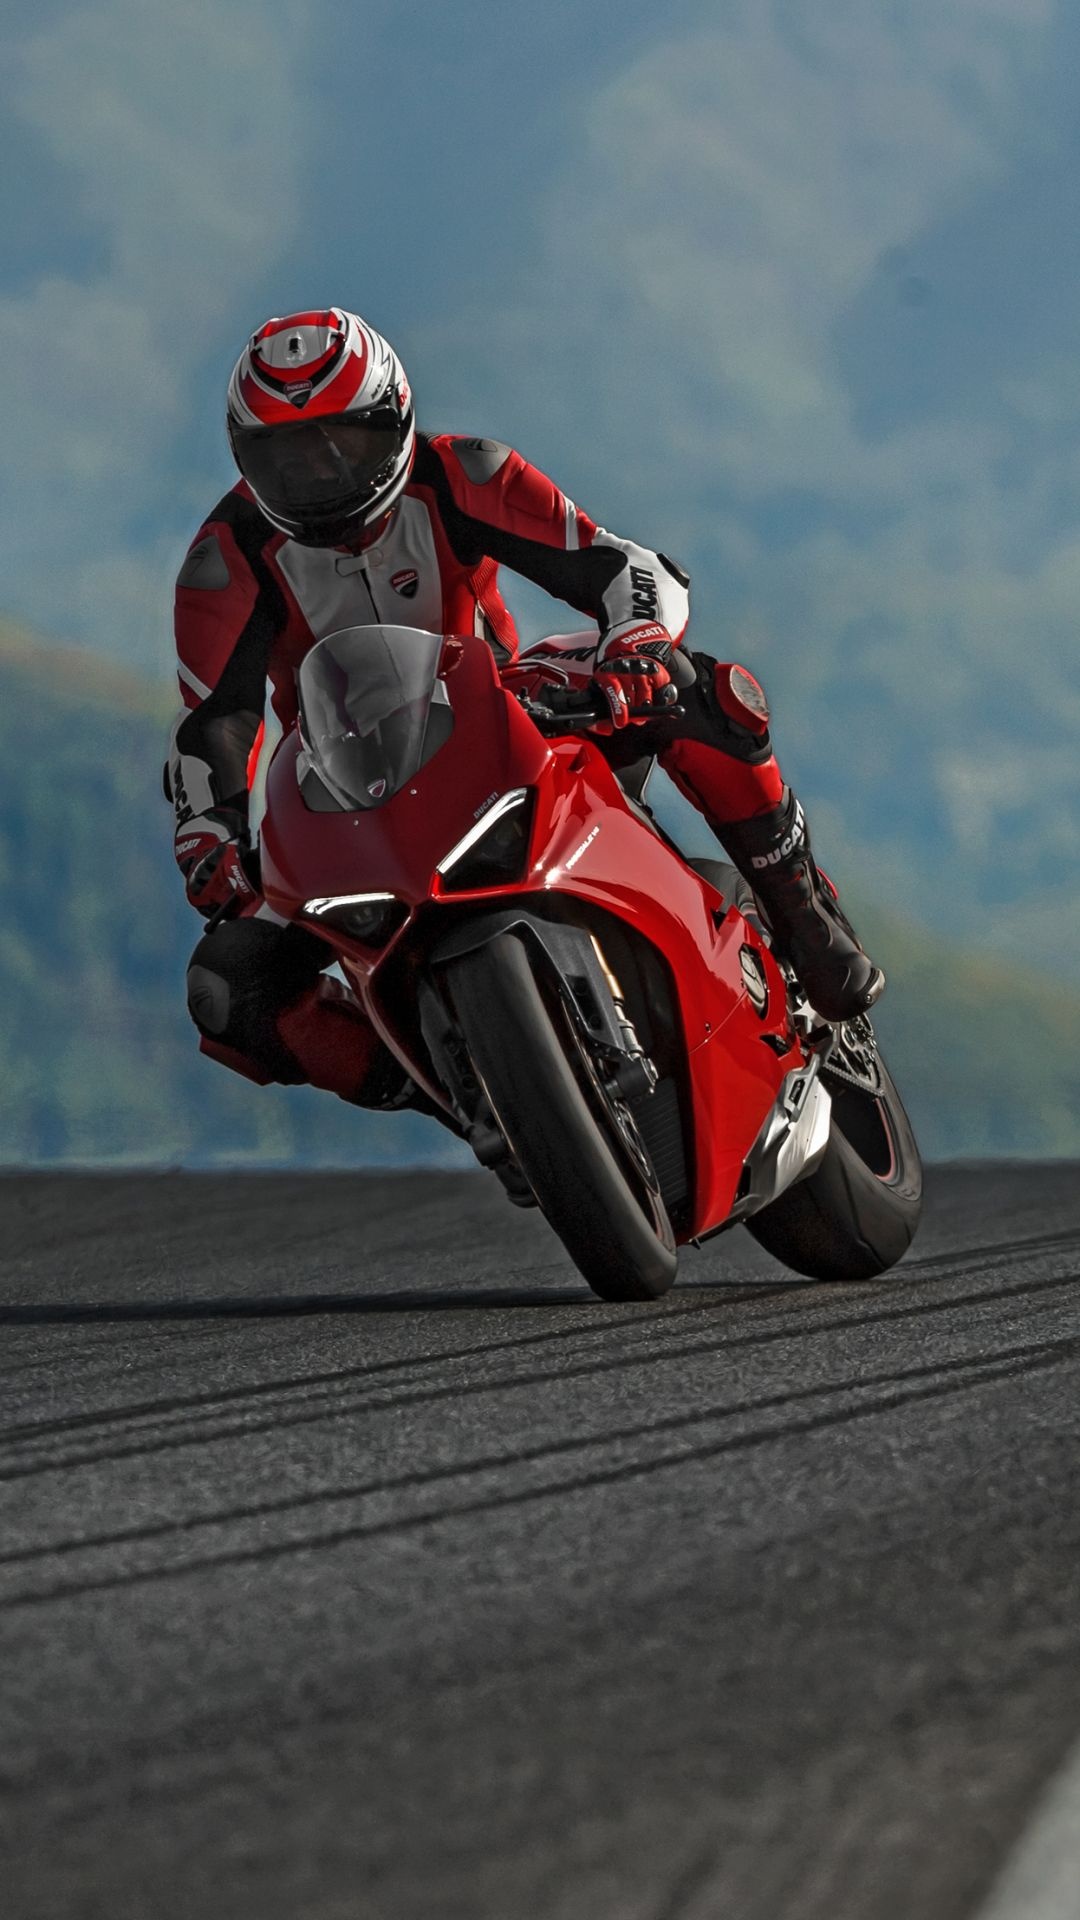 Motorcycle Racing: Ducati Superbike, Panigale v4, 2018, Motorcycling. 1080x1920 Full HD Background.